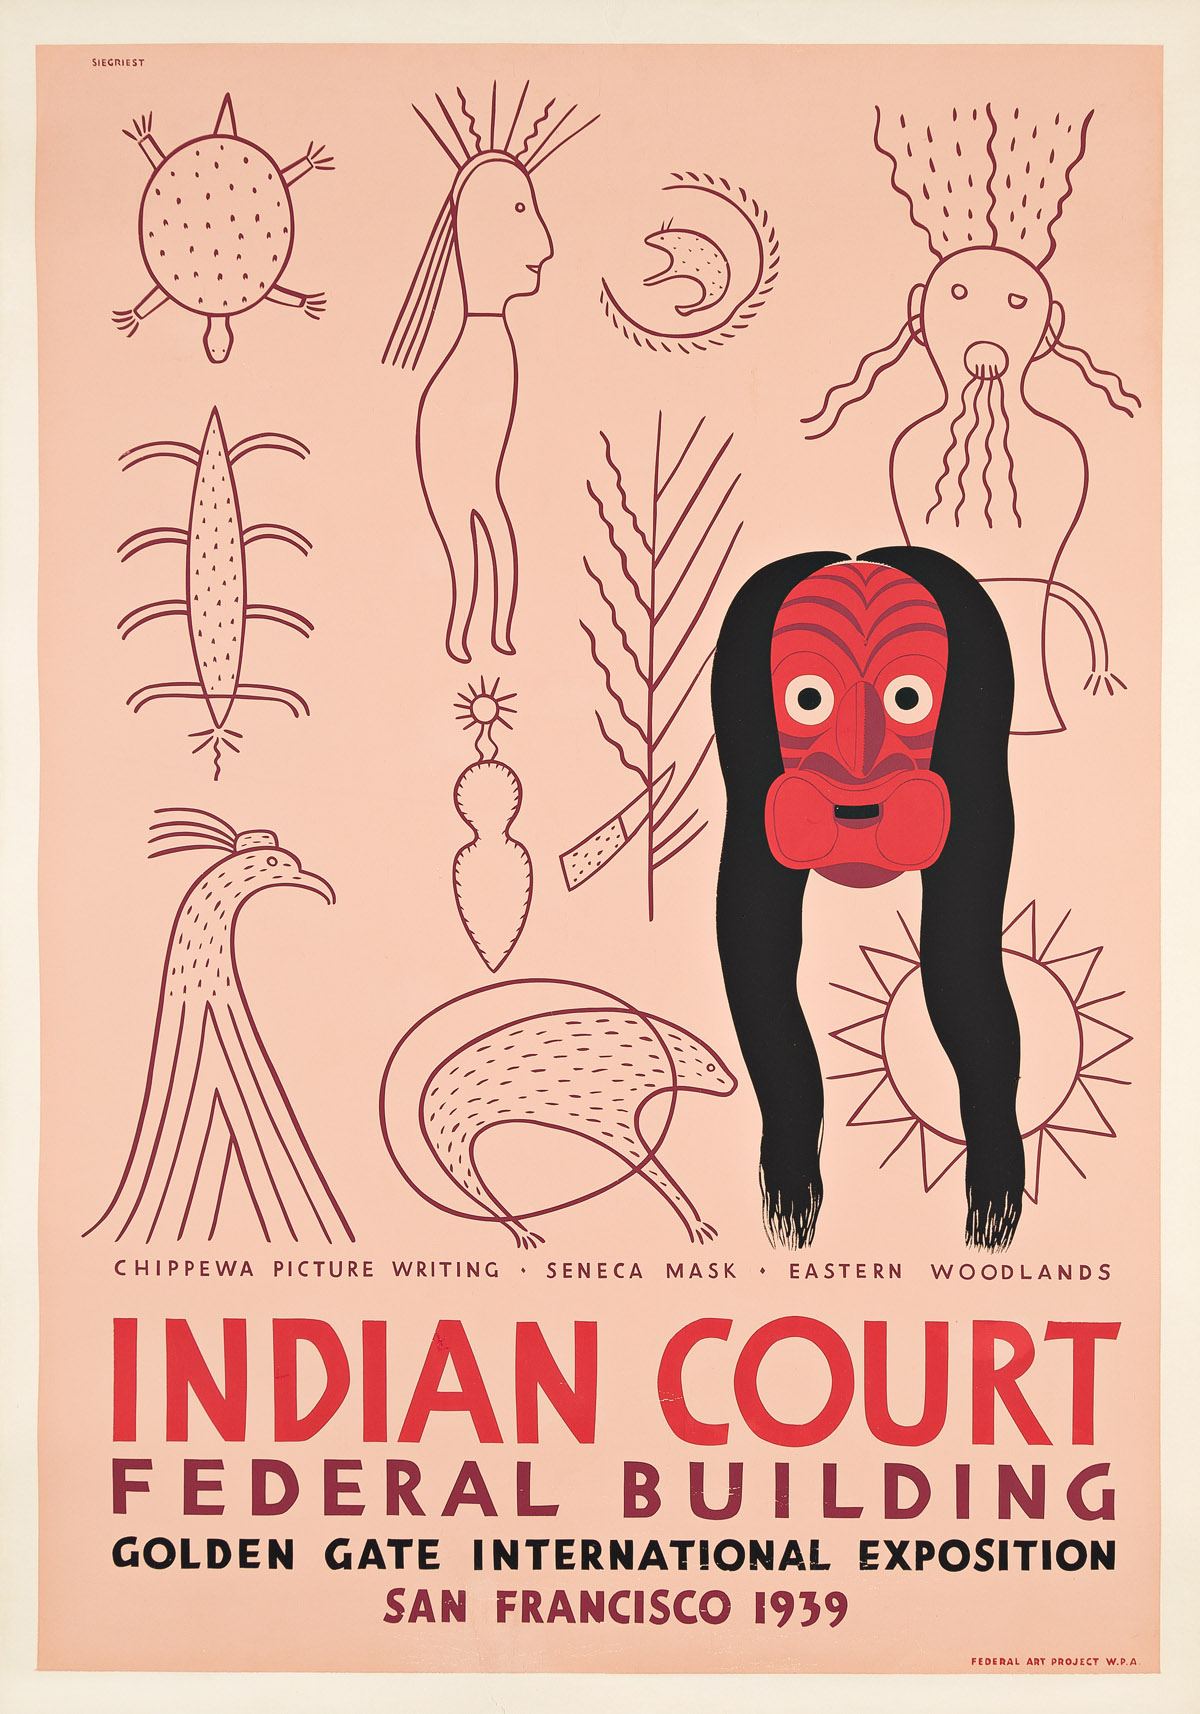 LOUIS B. SIEGRIEST (1899-1989) Indian Court Federal Building / Chippewa Picture Writing.